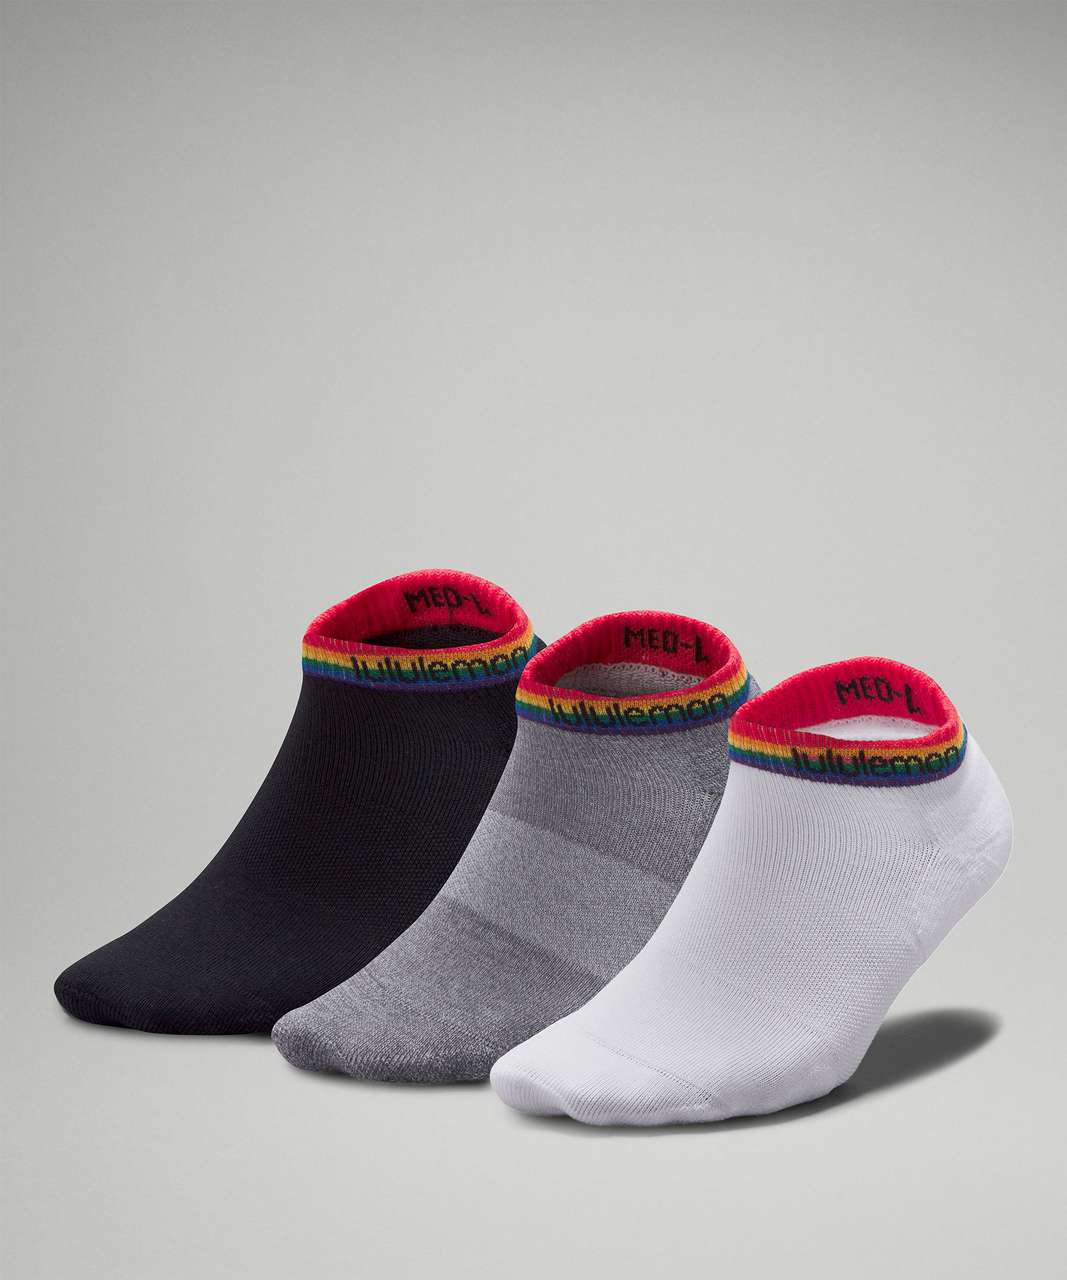 Lululemon Womens Daily Stride Comfort Ankle Sock *3 Pack - White / Heather Grey / Black (First Release)